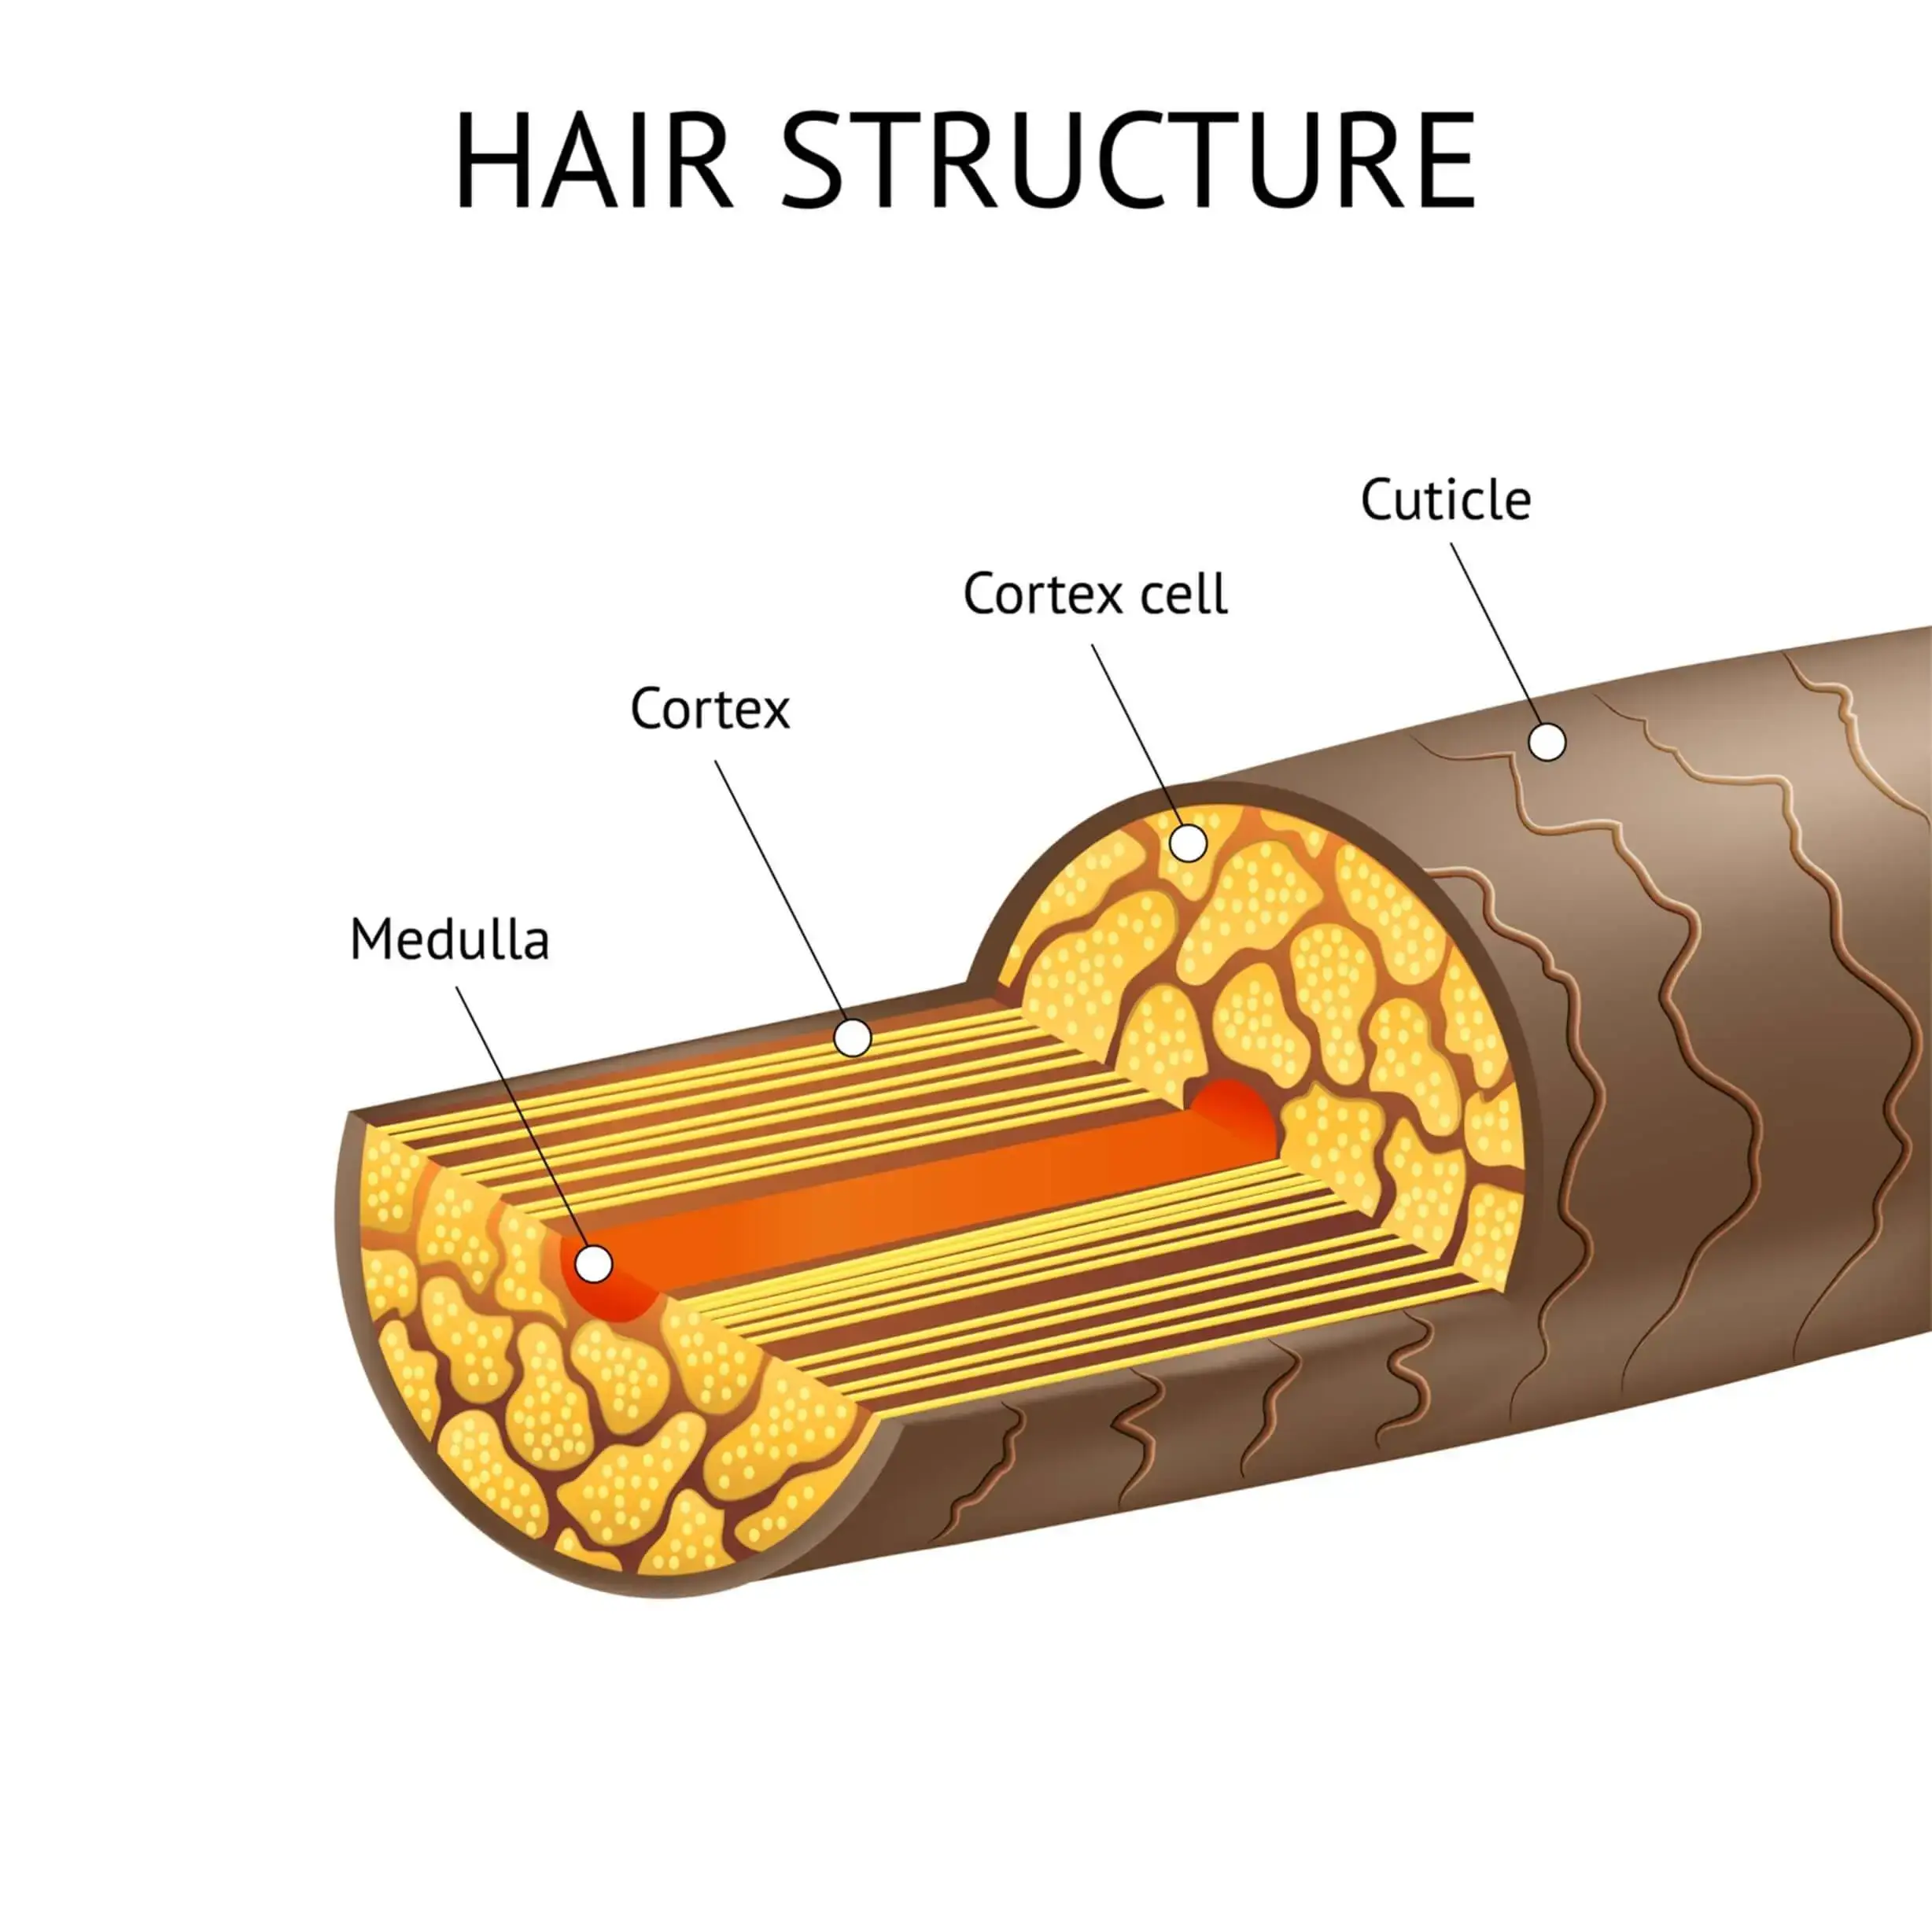 Diagram showing the internal structure of a hair strand